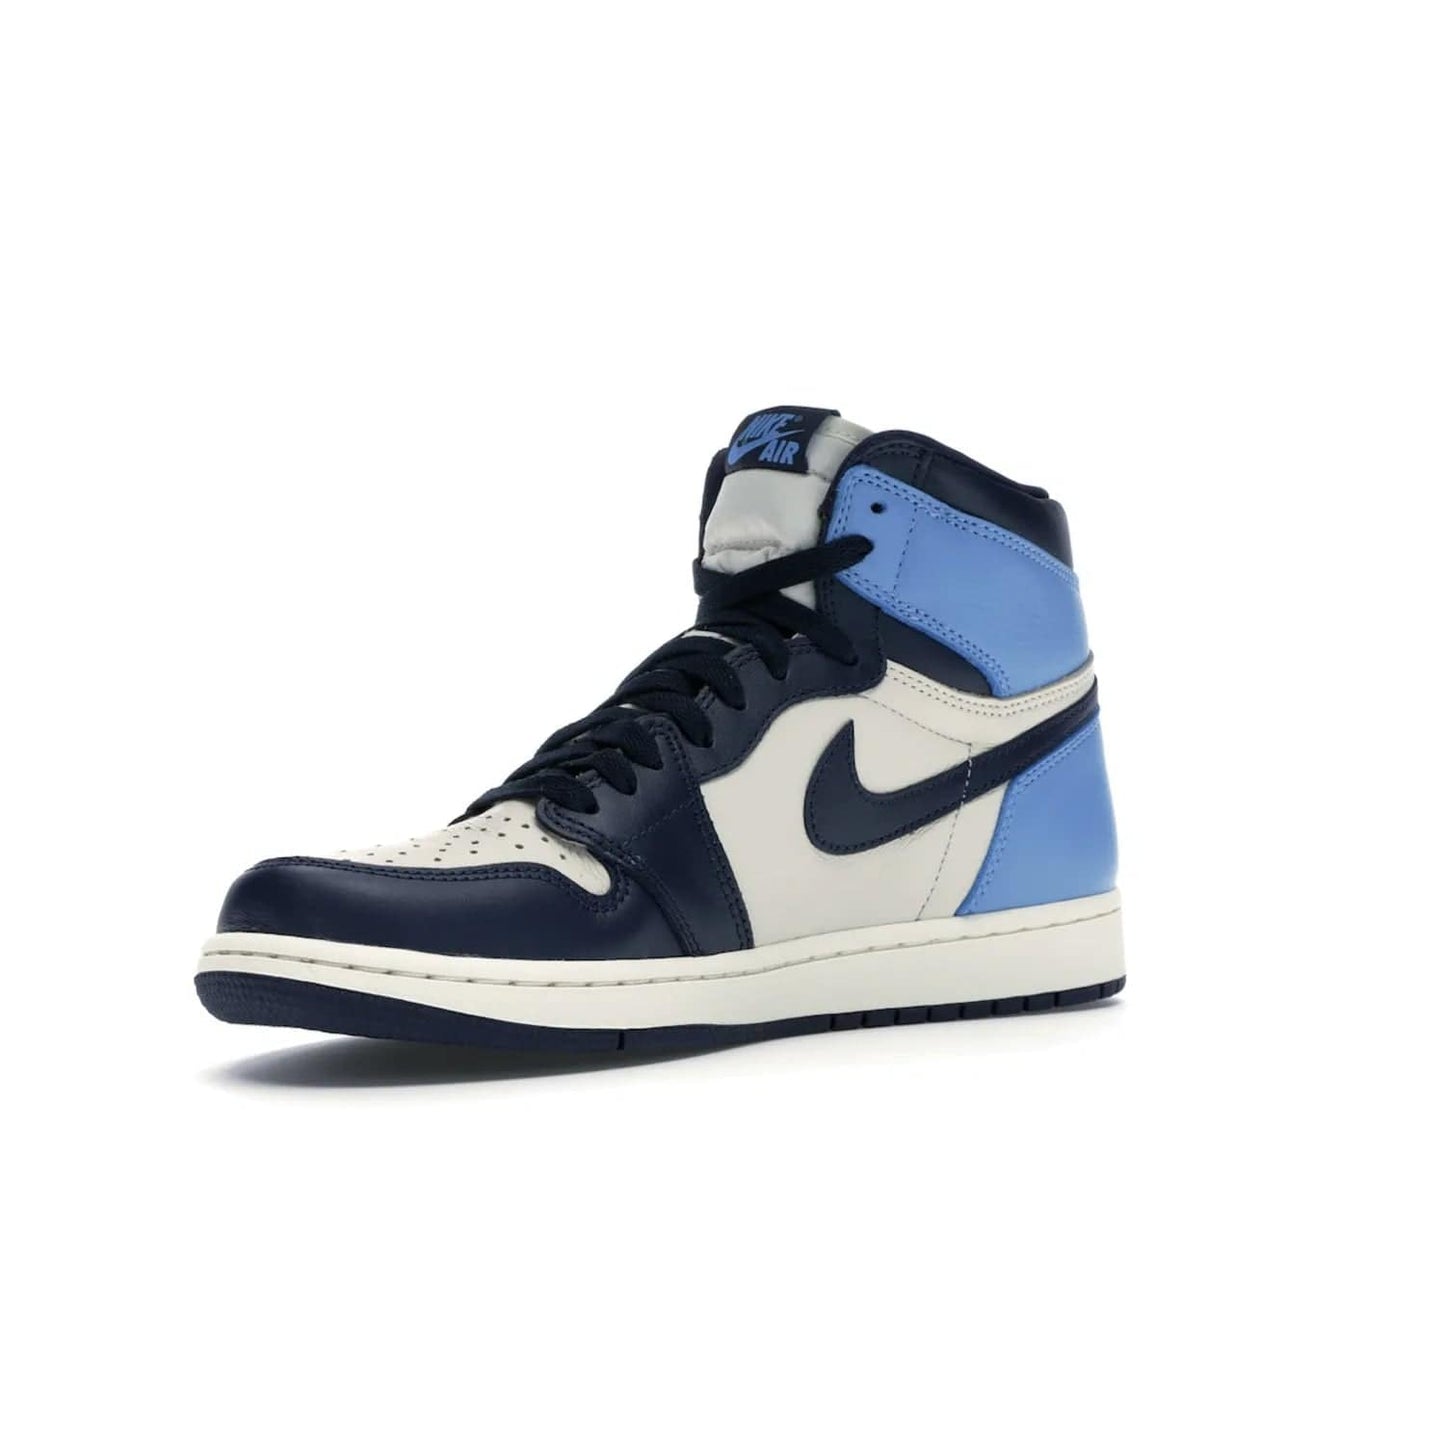 Jordan 1 Retro High Obsidian UNC - Image 15 - Only at www.BallersClubKickz.com - Bring a timeless classic to your wardrobe with the Air Jordan 1 Retro High "Obsidian/University Blue”. A full leather upper combines Obsidian and University Blue detailing for a retro Jordan style. Stitched Jumpman logo pays tribute to UNC. Experience classic style with a timeless sneaker.